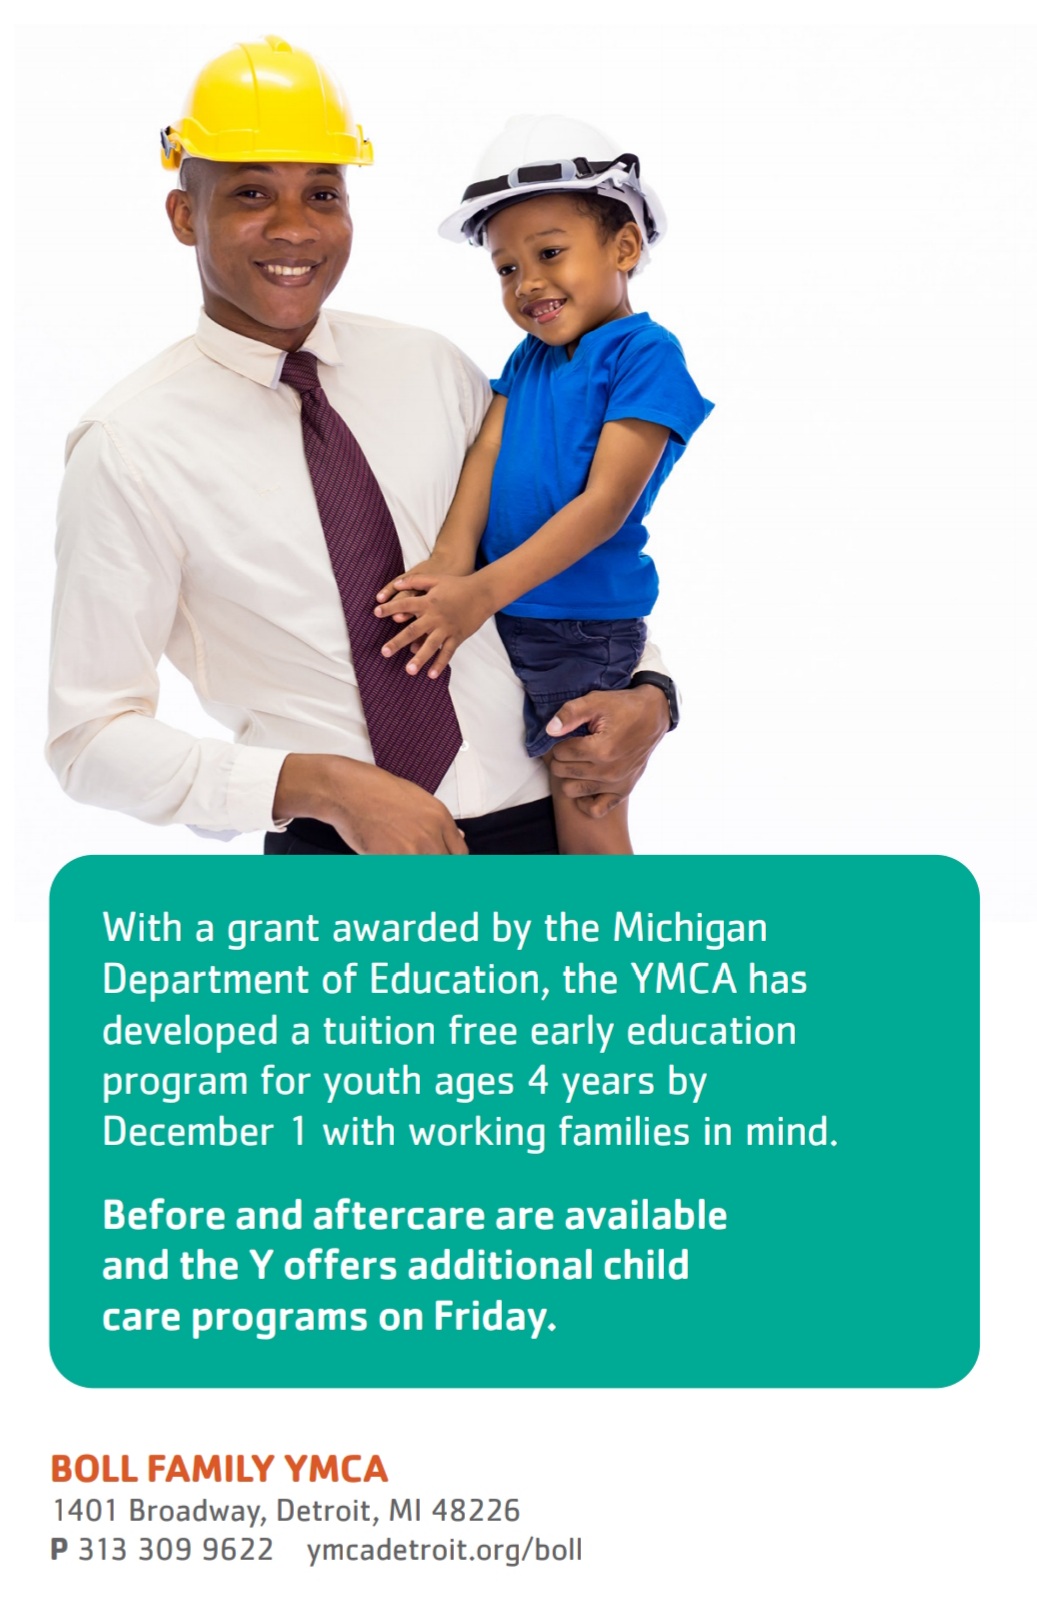 Tuition Free Pre-School for children ages 4 by December 1, 2020 at the Boll Family YMCA in Downtown Detroit